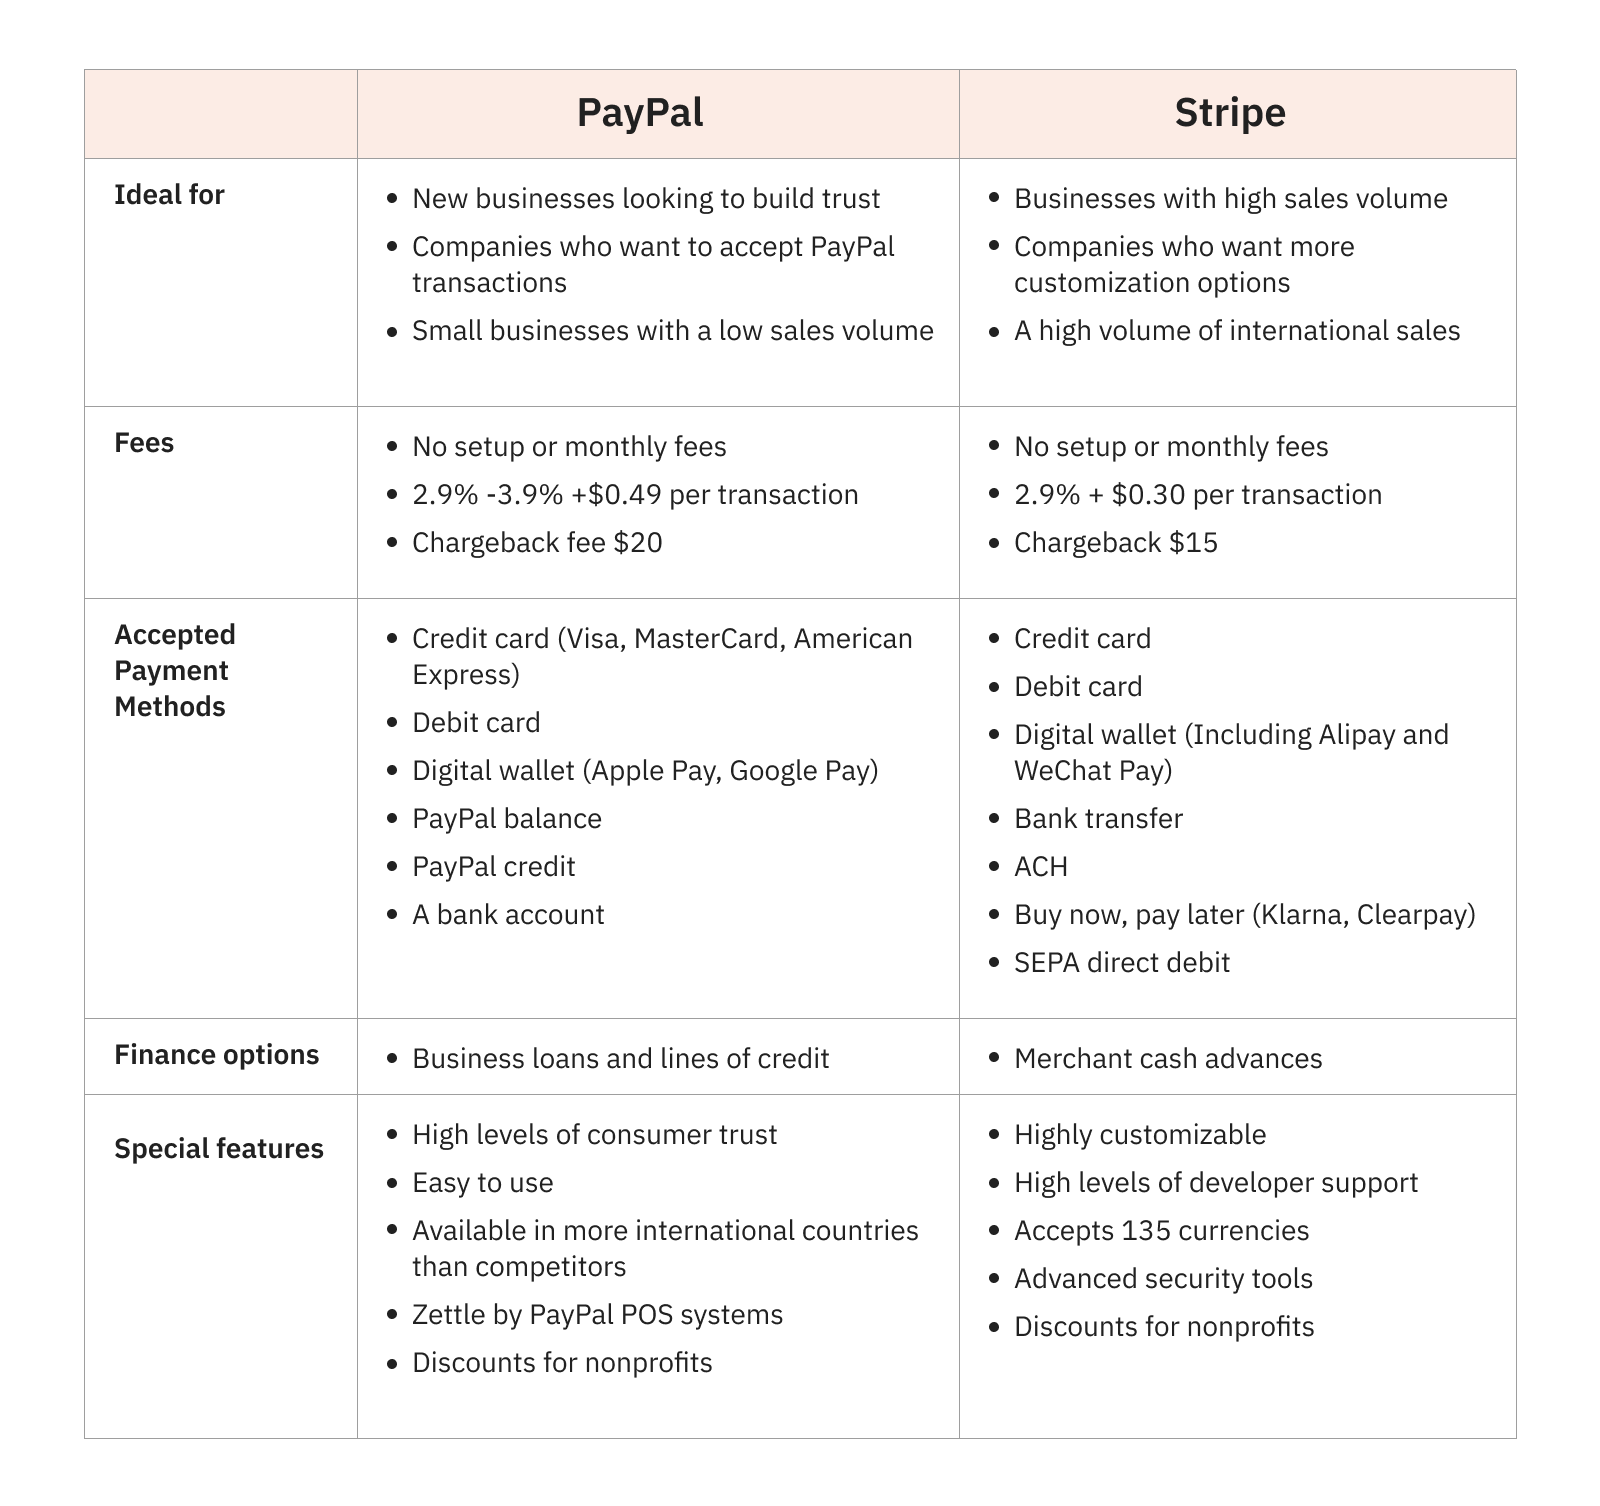 PayPal vs Stripe: Pros and Cons